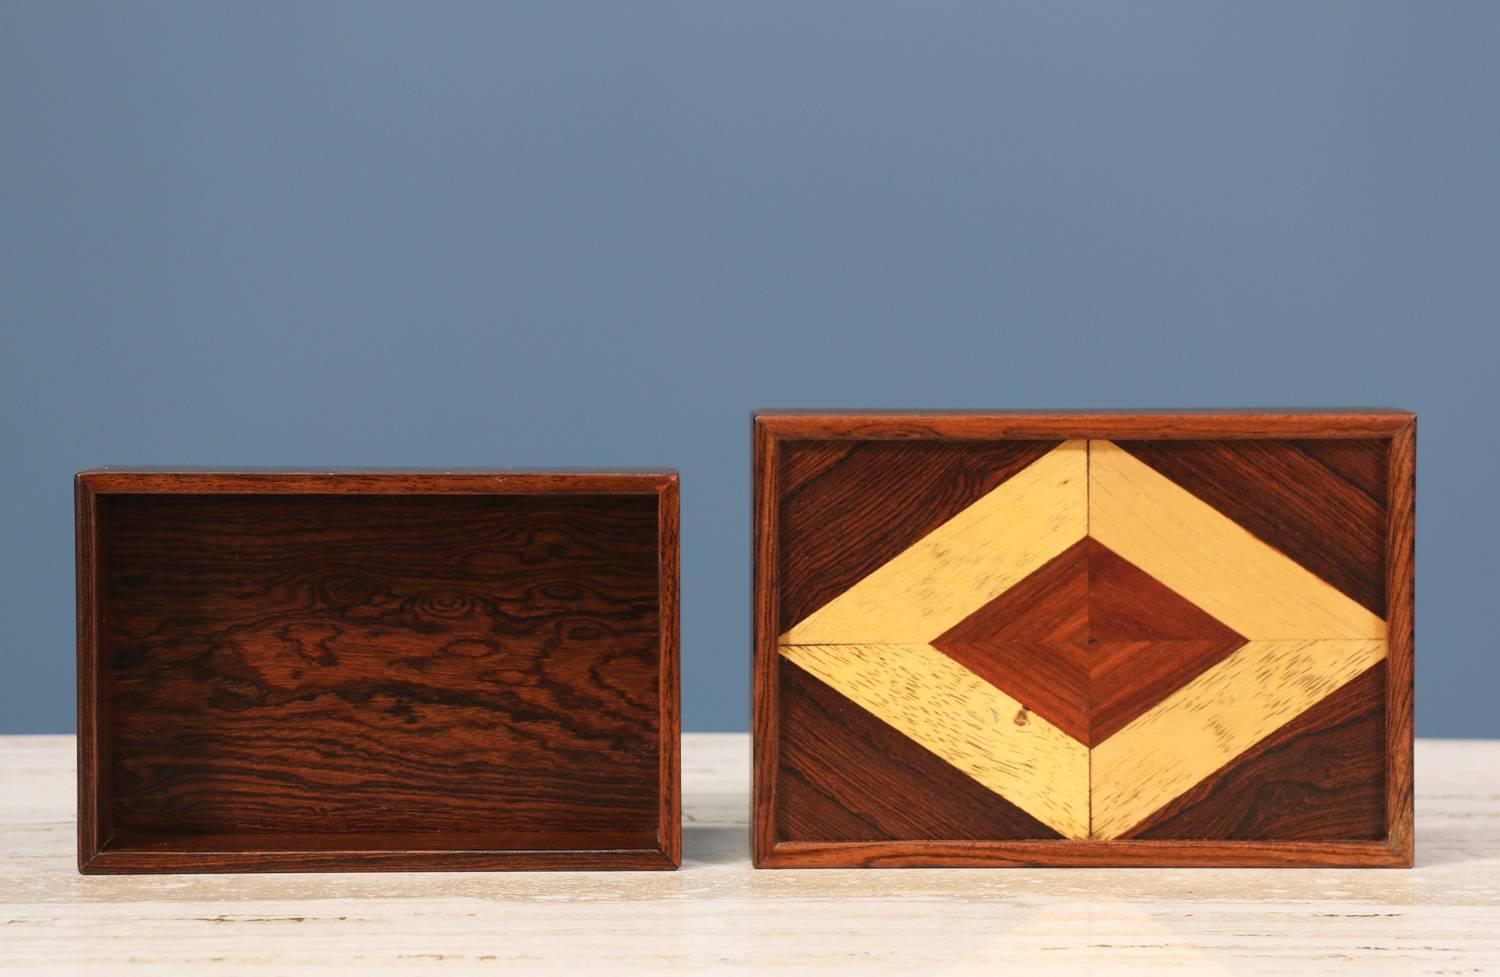 Decorative box designed by Don S. Shoemaker for Señal Funiture in Mexico circa 1960’s. This Mexican modern box features a rosewood body with a beautiful diamond shaped oak parquetry adorning the top of the box.